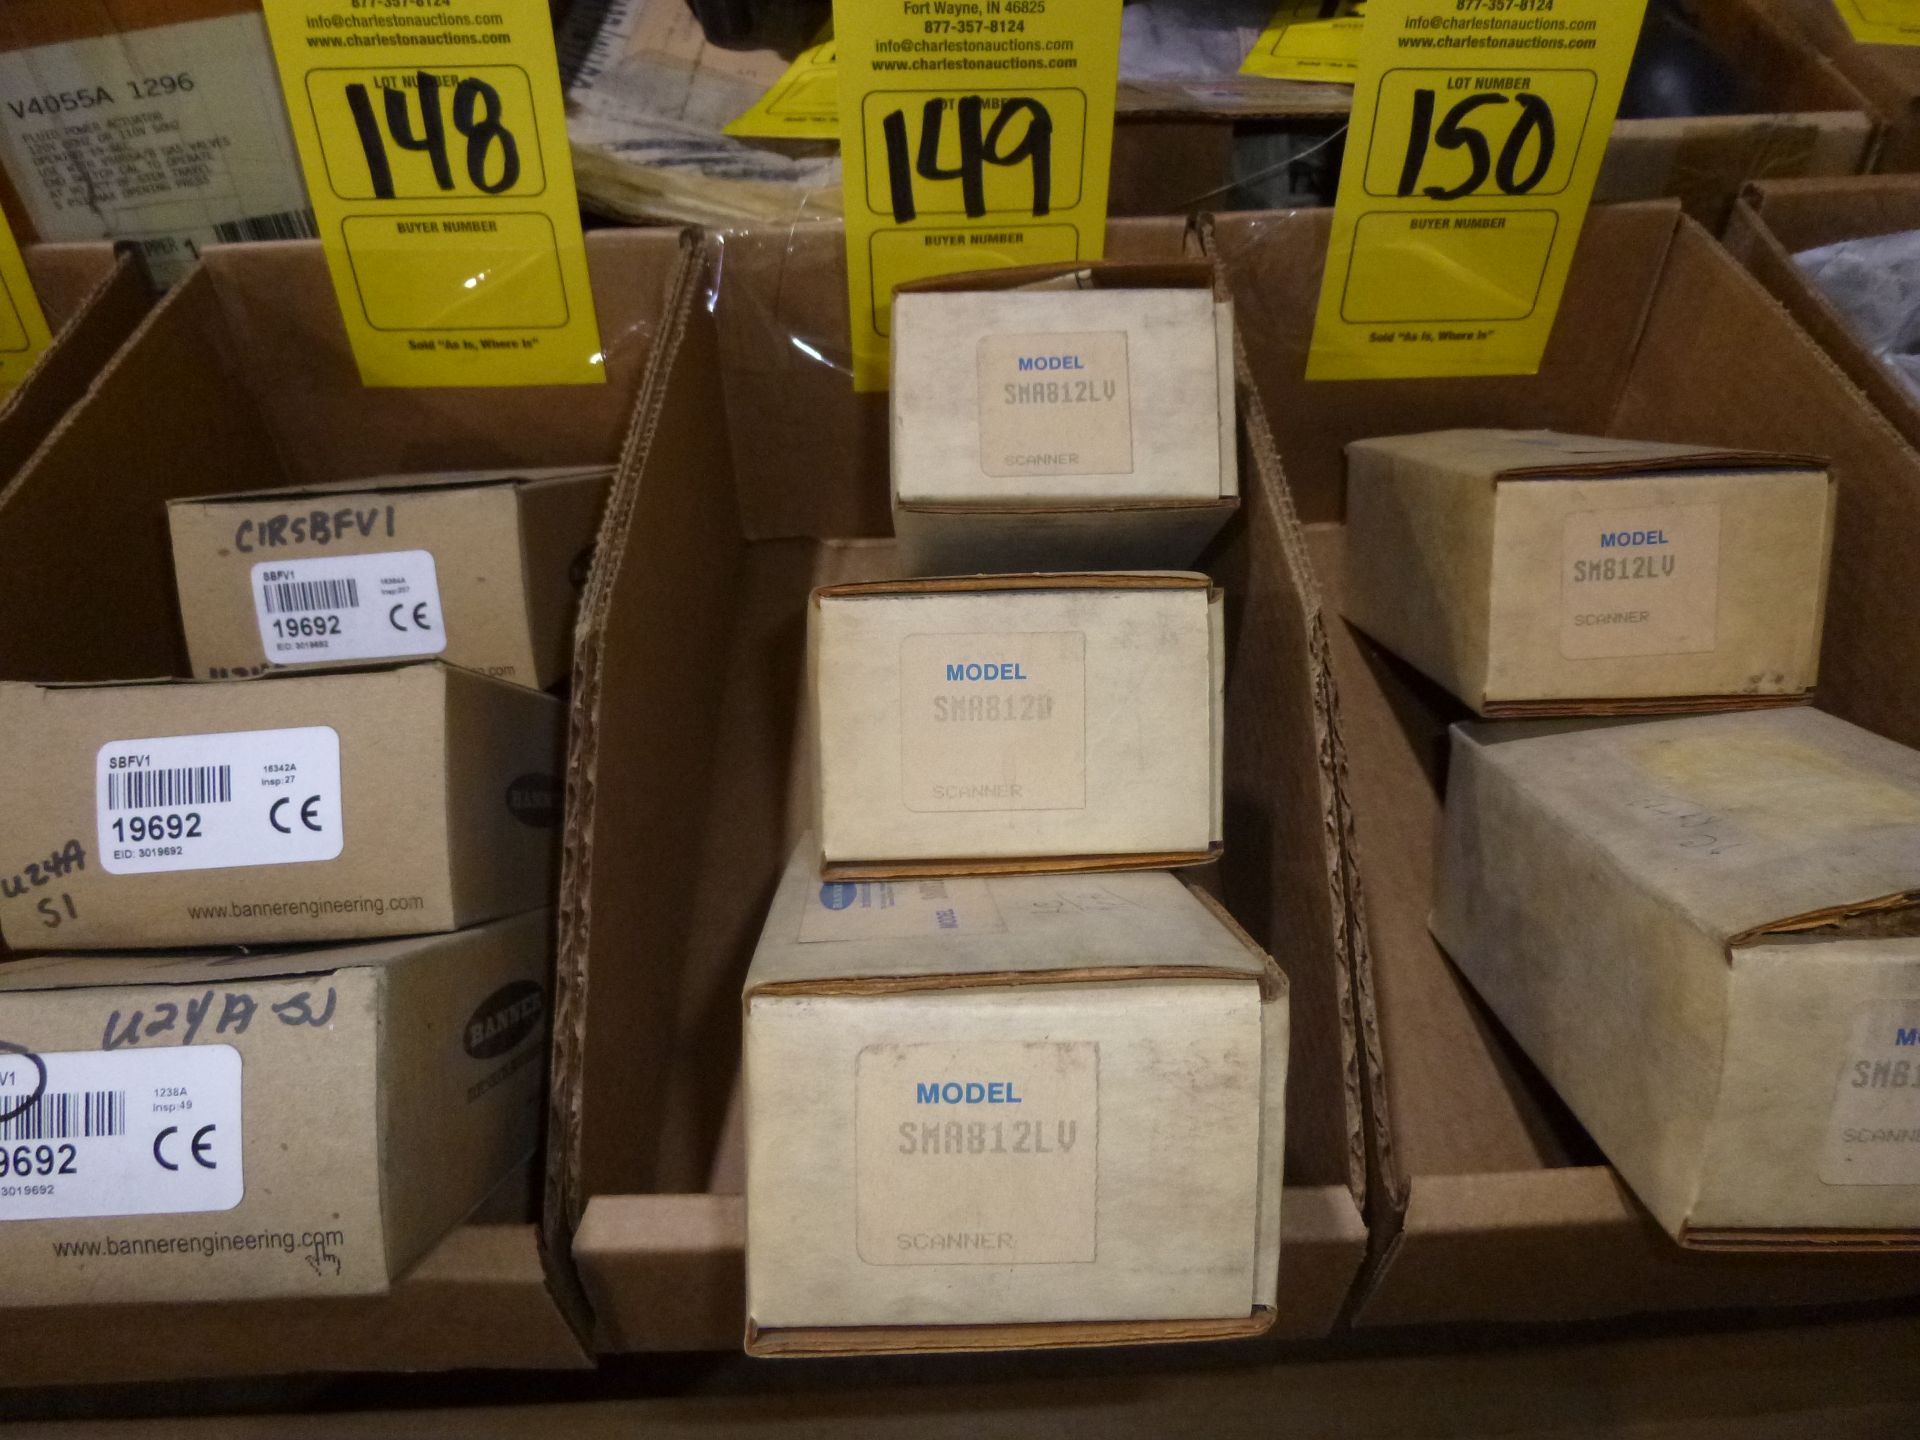 Qty 3 Banner SMA812LV, new in boxes, as always with Brolyn LLC auctions, all lots can be picked up